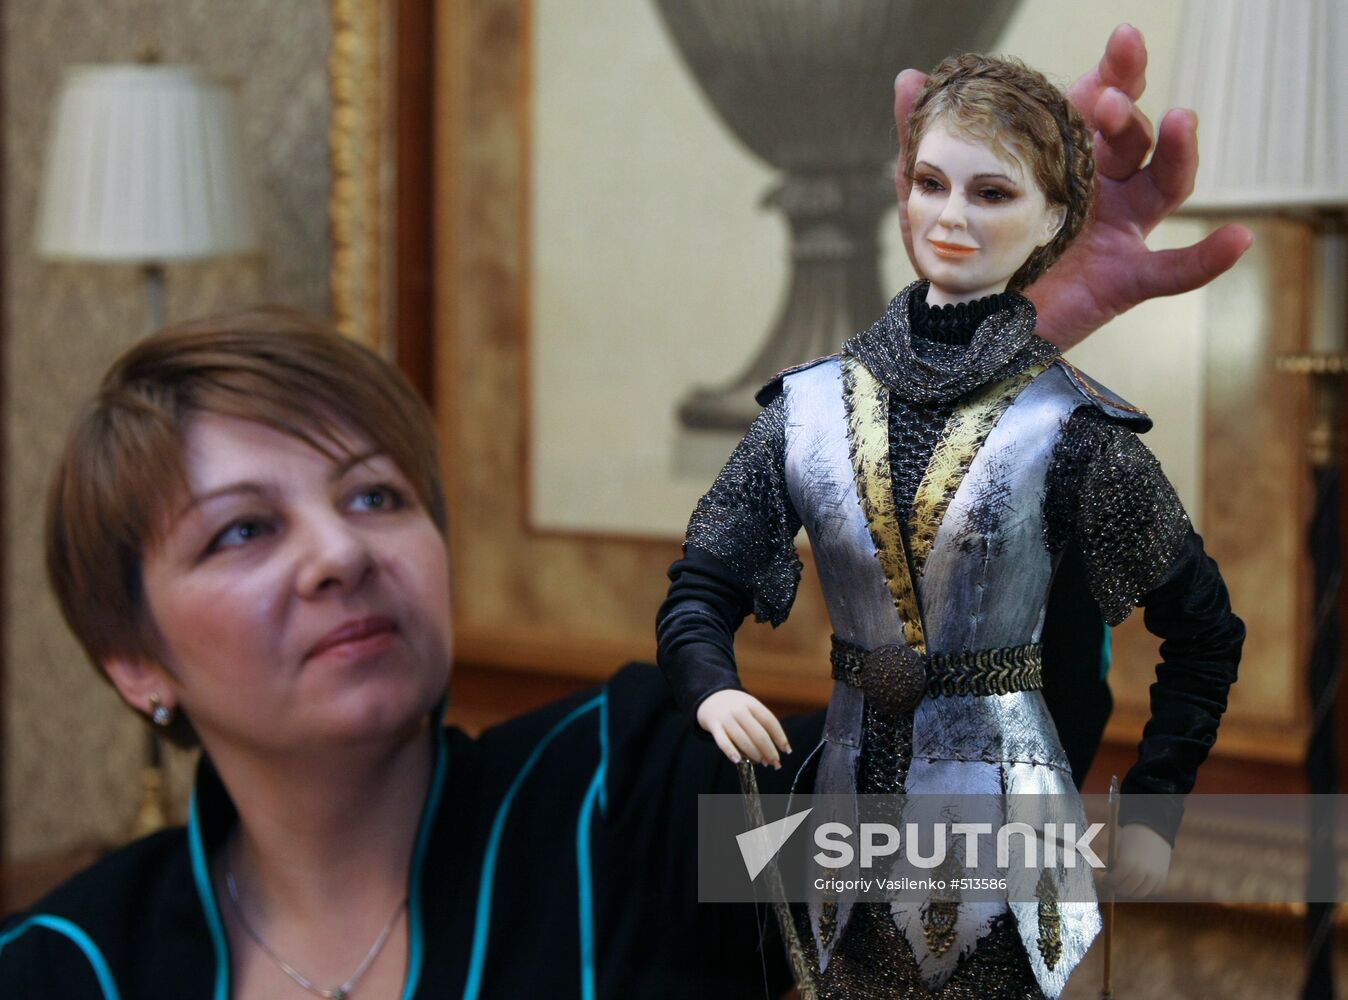 Politician Doll Parade 2009 charity auction held in Kiev